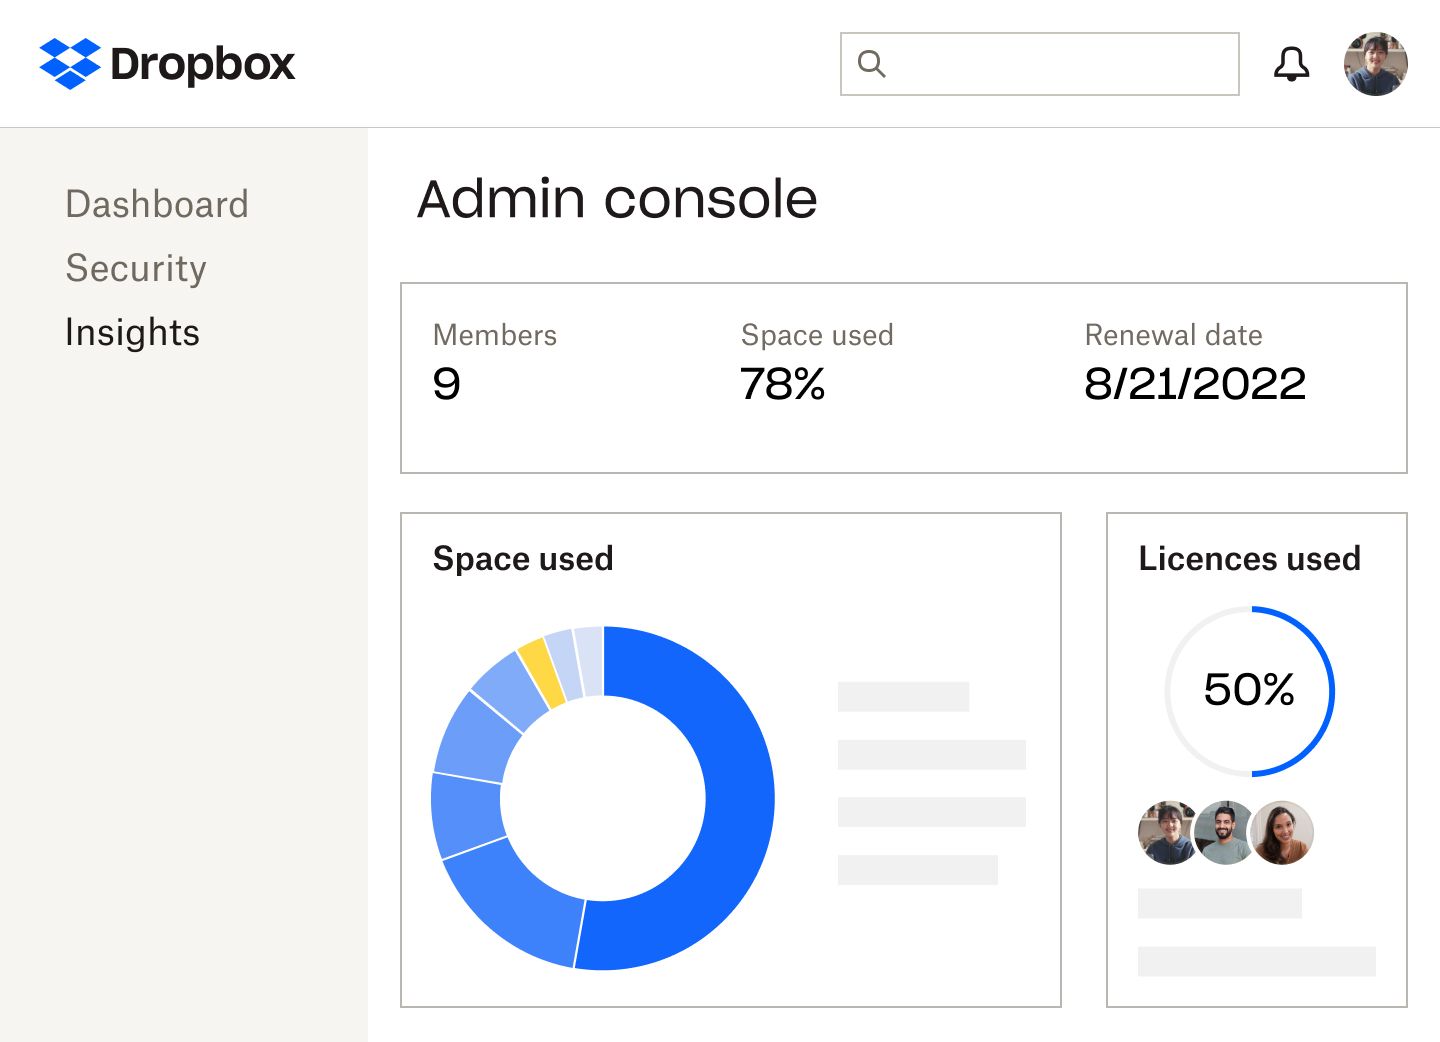 The Dropbox admin console that shows number of members, percent of storage space and licences used, the renewal date of the subscription, and a blue and yellow pie graph of the space used